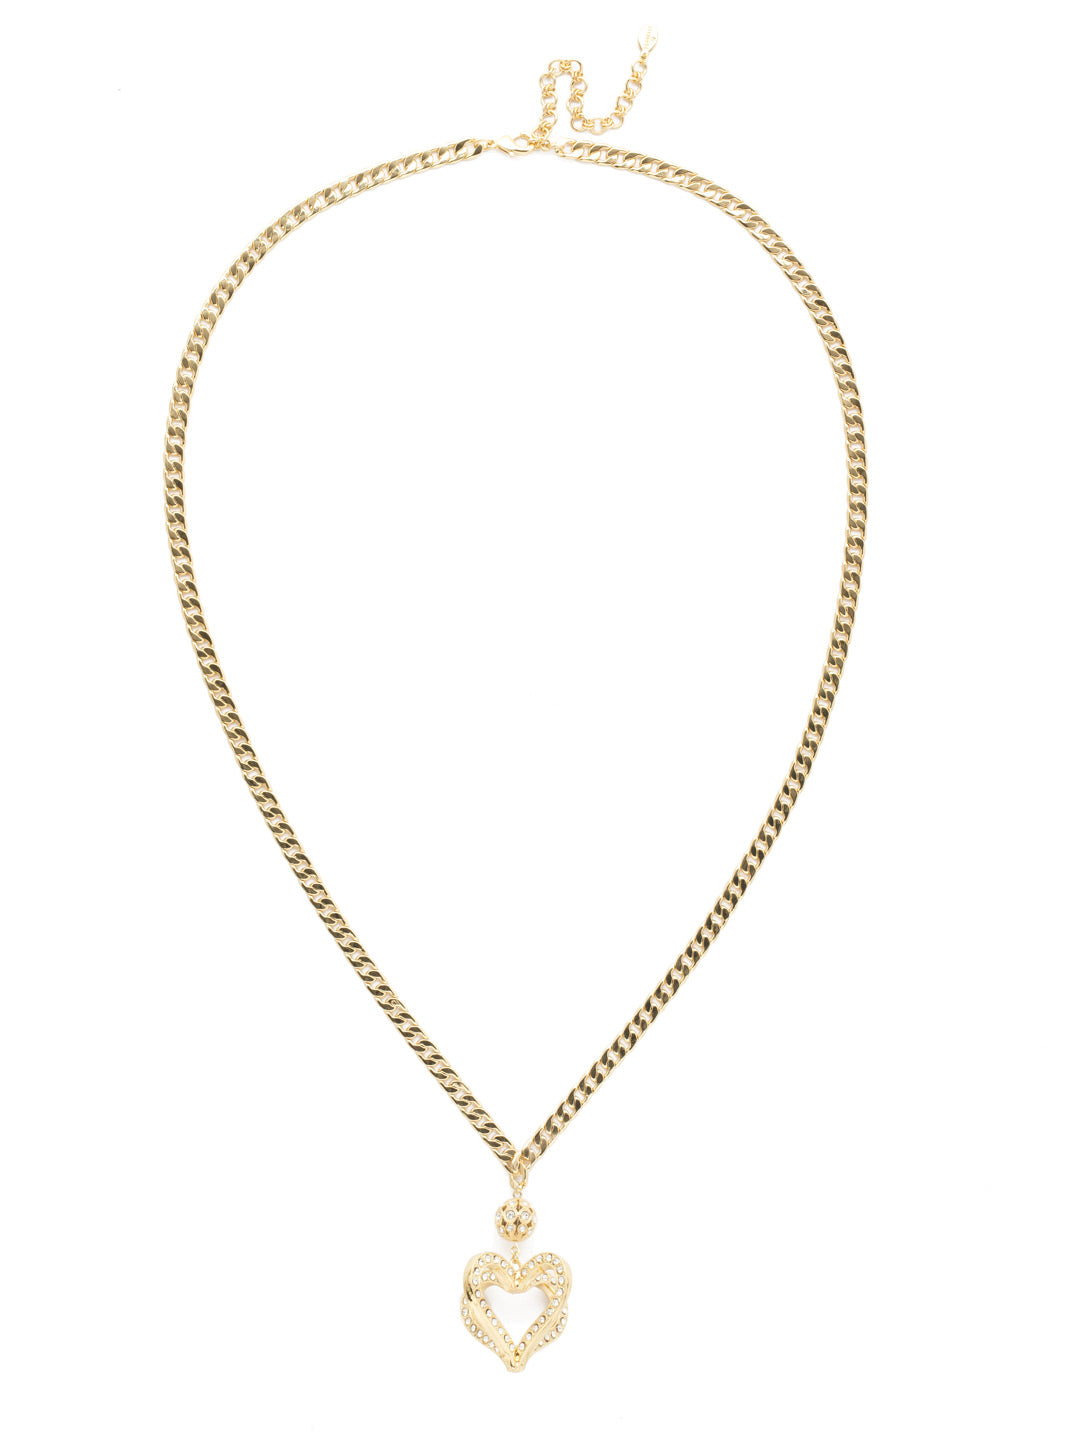 Adelynn Long Strand Necklace - NEC21BGPLP - Layered to perfection! Get the look of three line necklaces in one. This long strand features a strands of darling hearts, pearls, crystals and more. Full of dainty details and sparkle galore. From Sorrelli's Polished Pearl collection in our Bright Gold-tone finish.